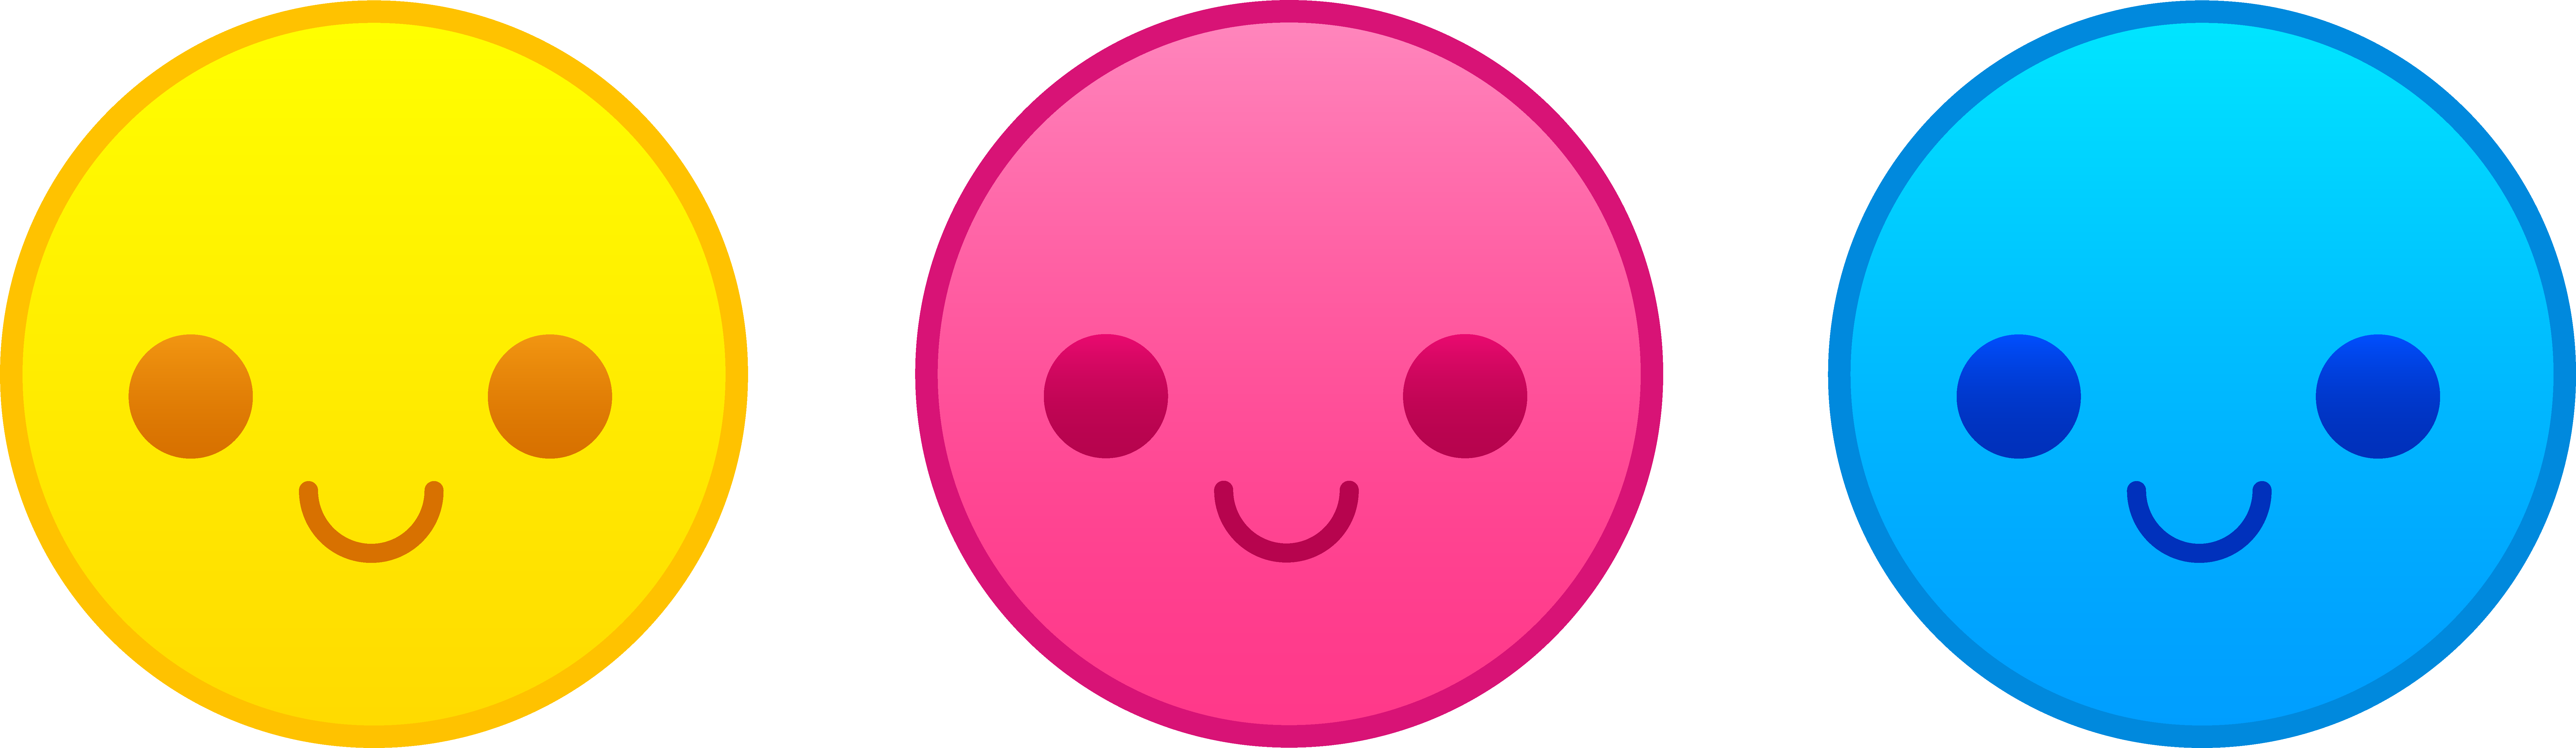 Pics Of Smiley Faces - Cliparts.co